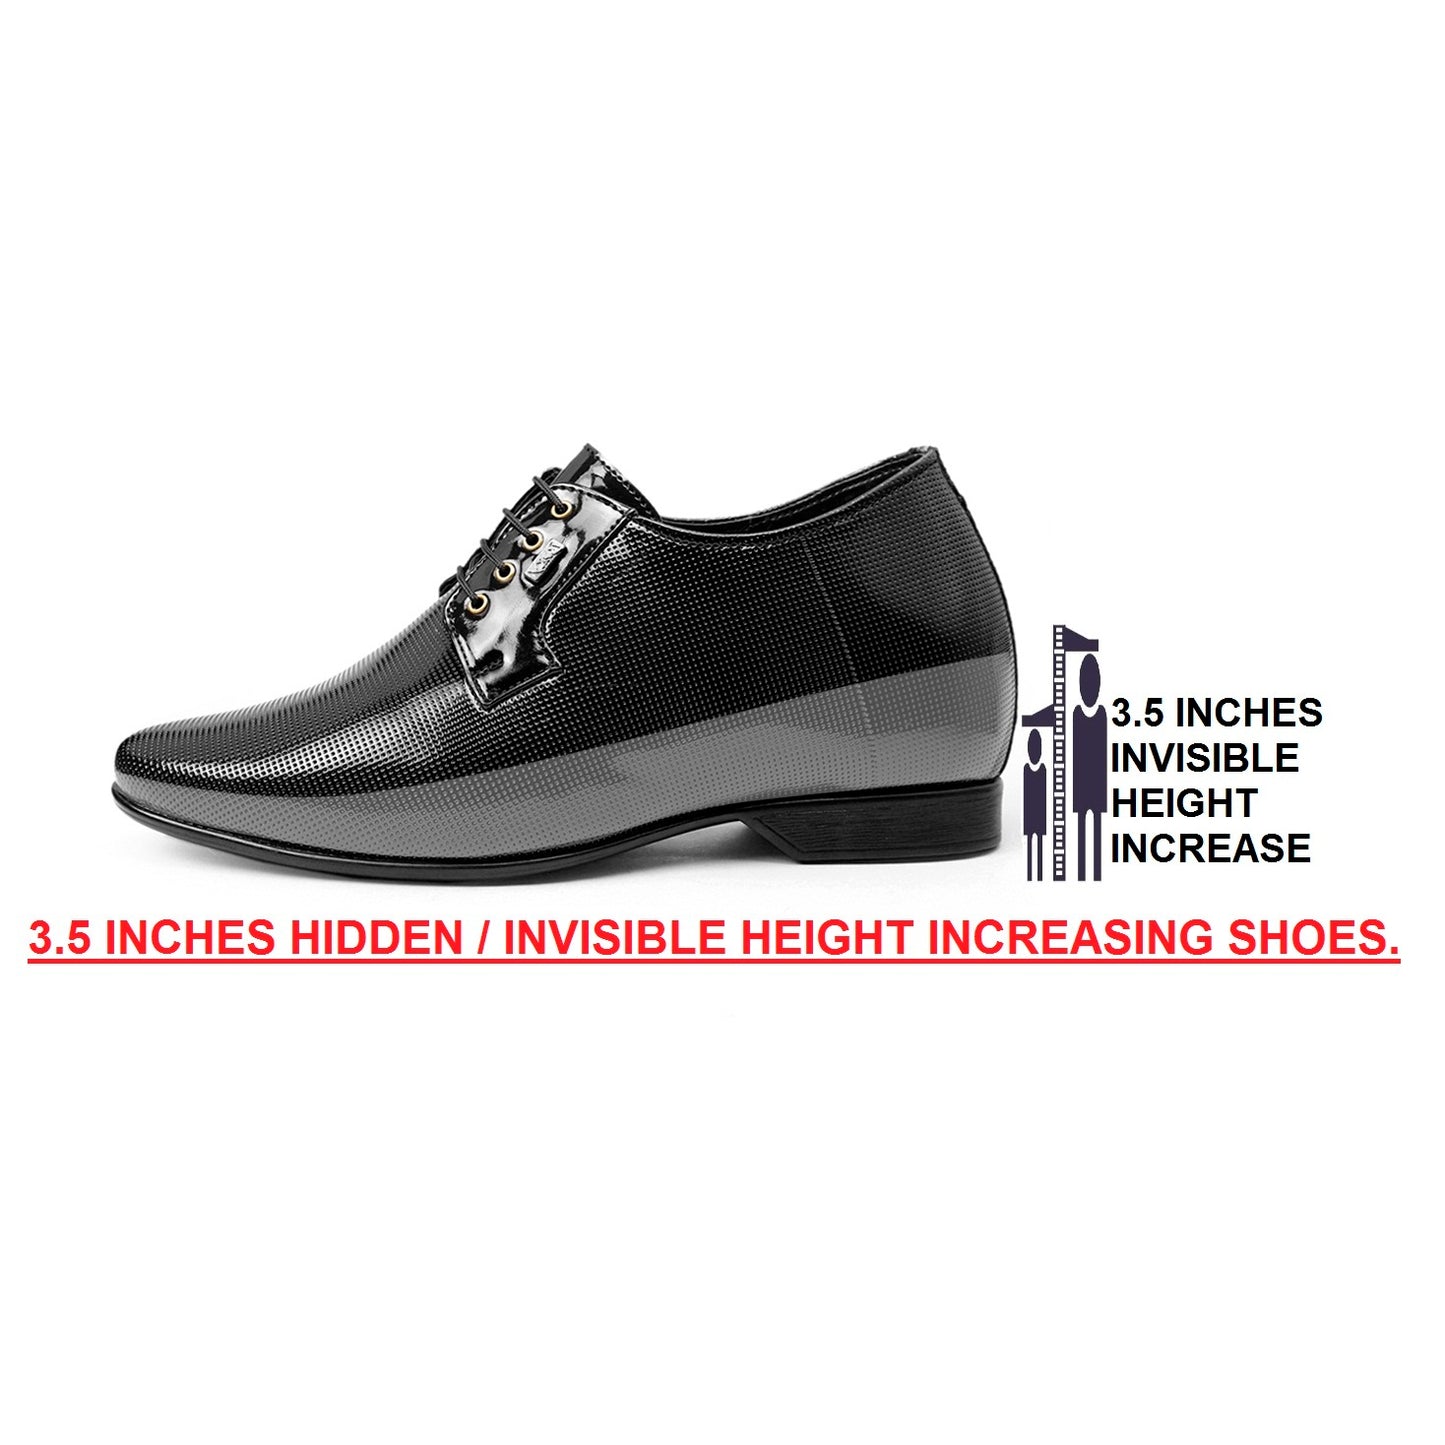 BXXY 9 cm (3.5 Inch) Height Increasing Casual Shoe Oxford Lace-Up Semi Brogue l Patent Faux Leather Shoes